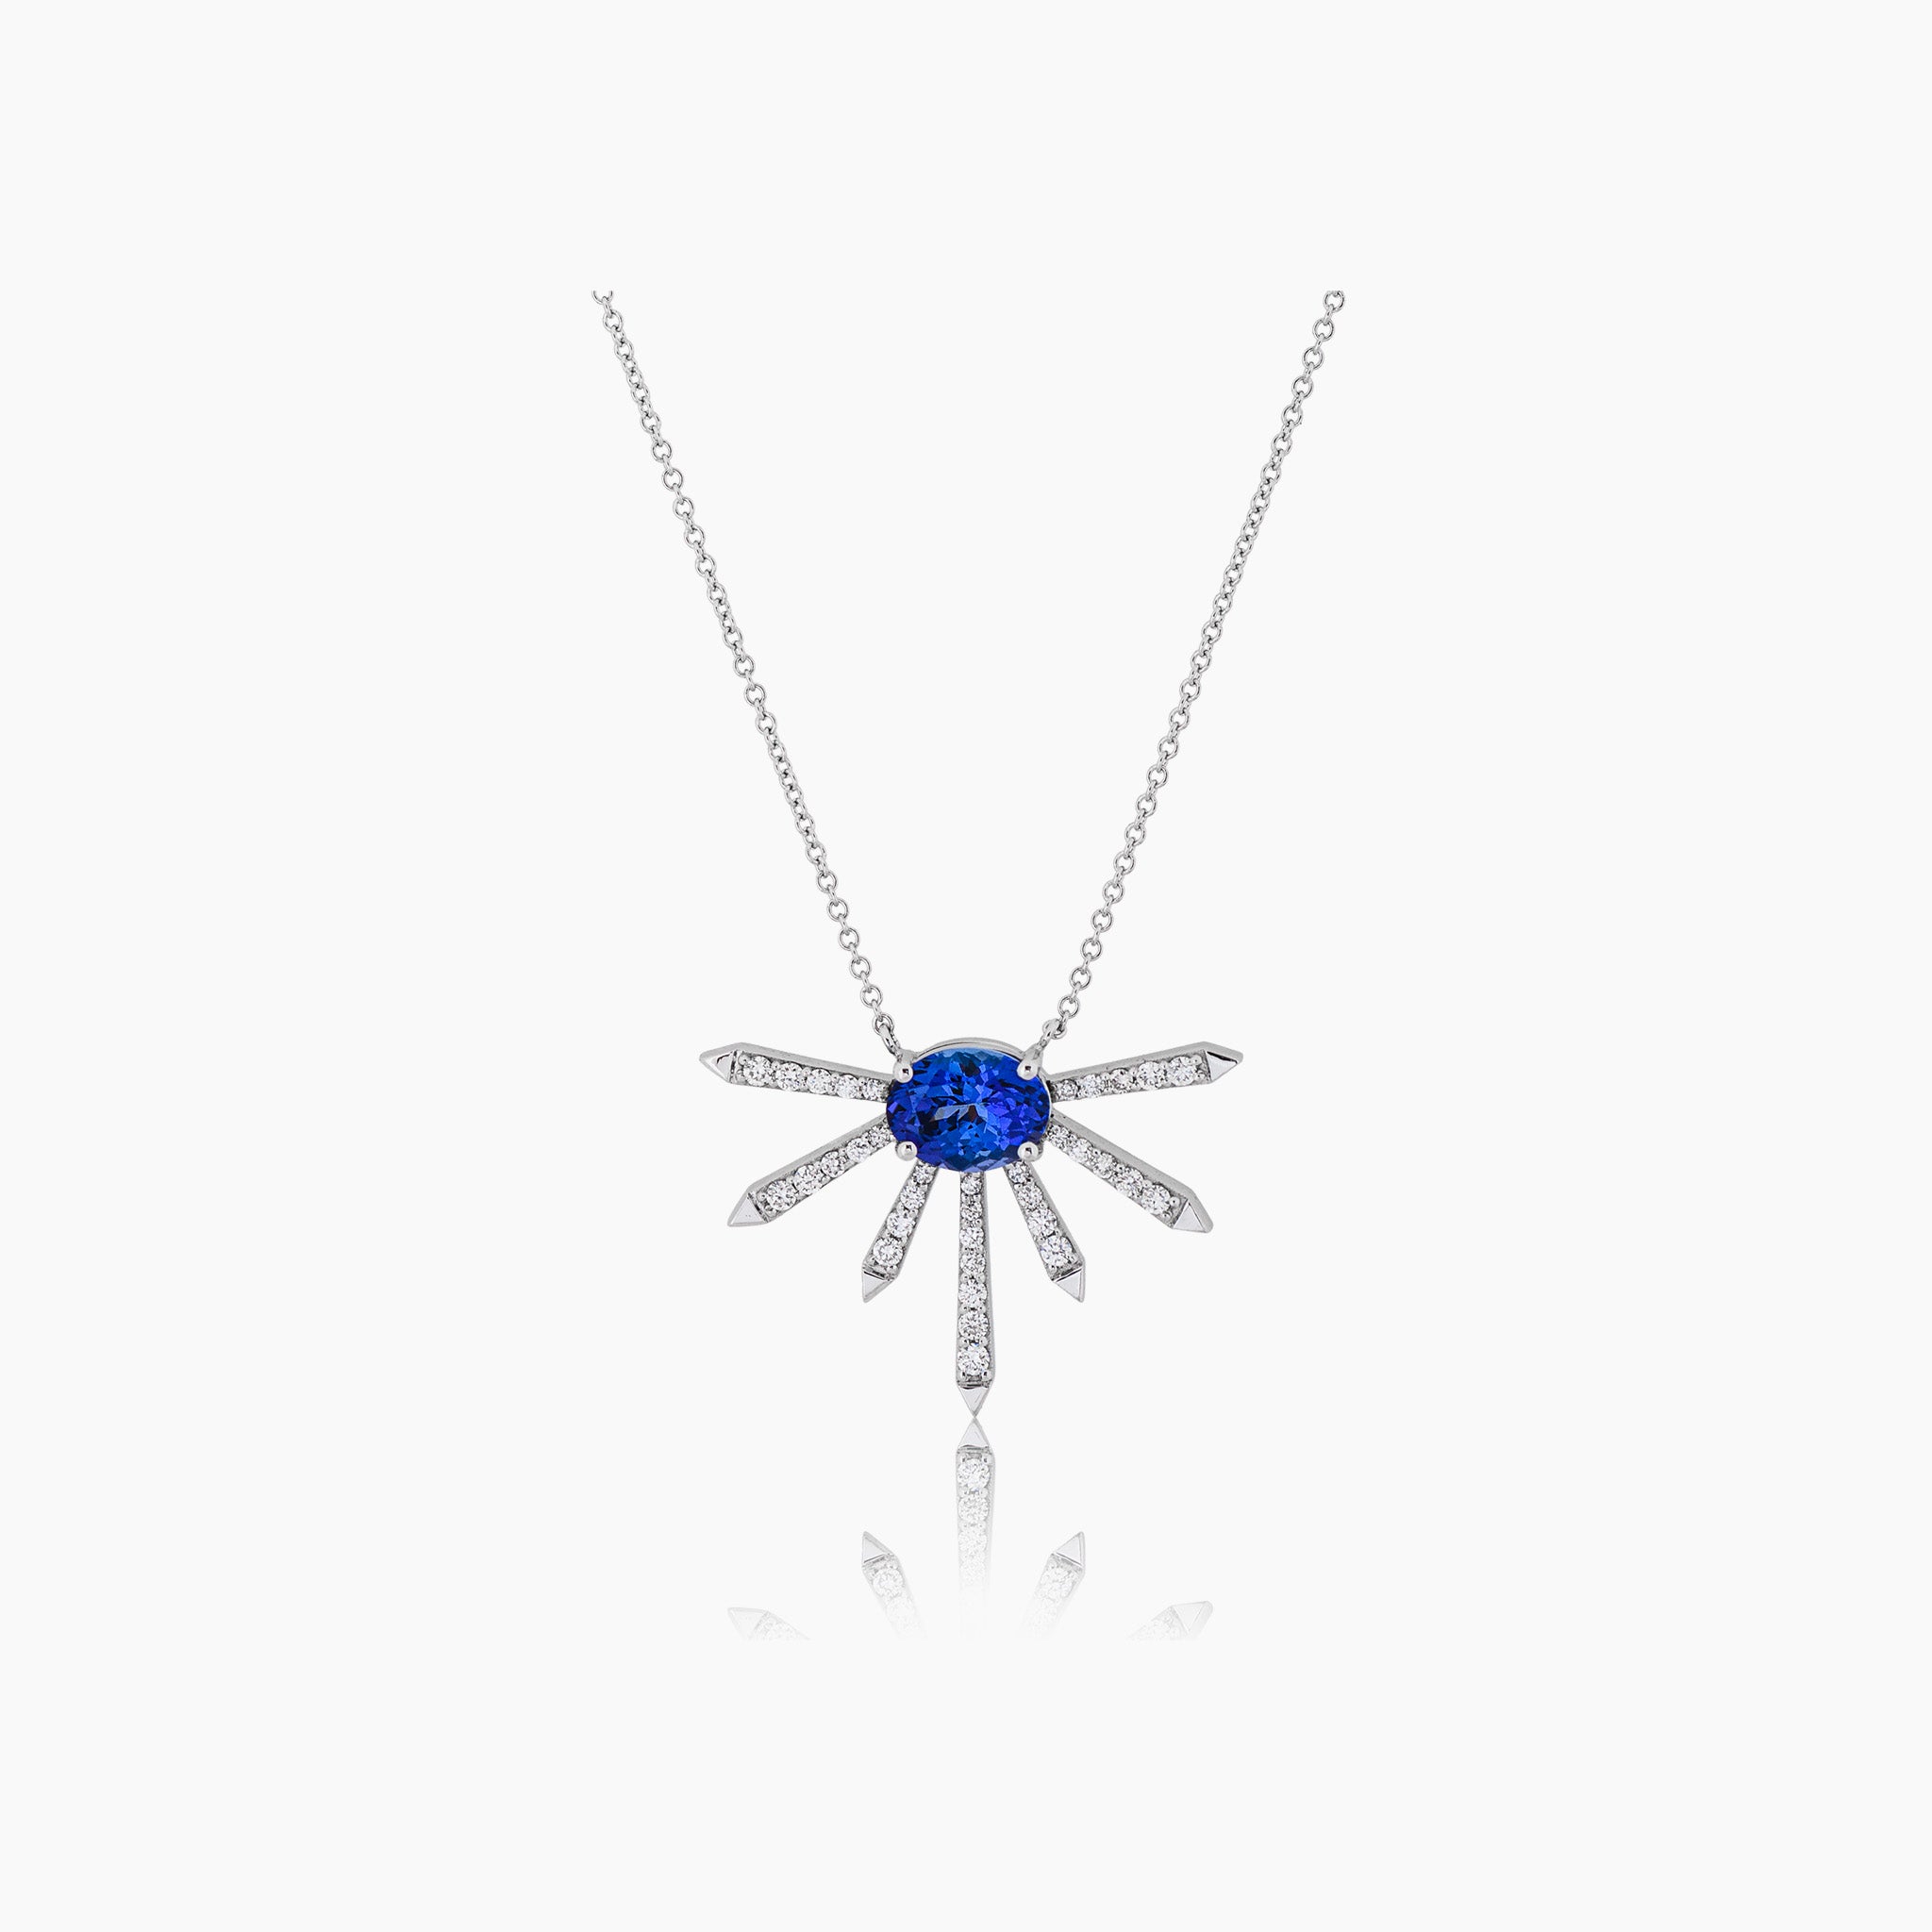 A breathtaking pendant featuring a stunning Tanzanite center stone surrounded by dazzling diamonds.